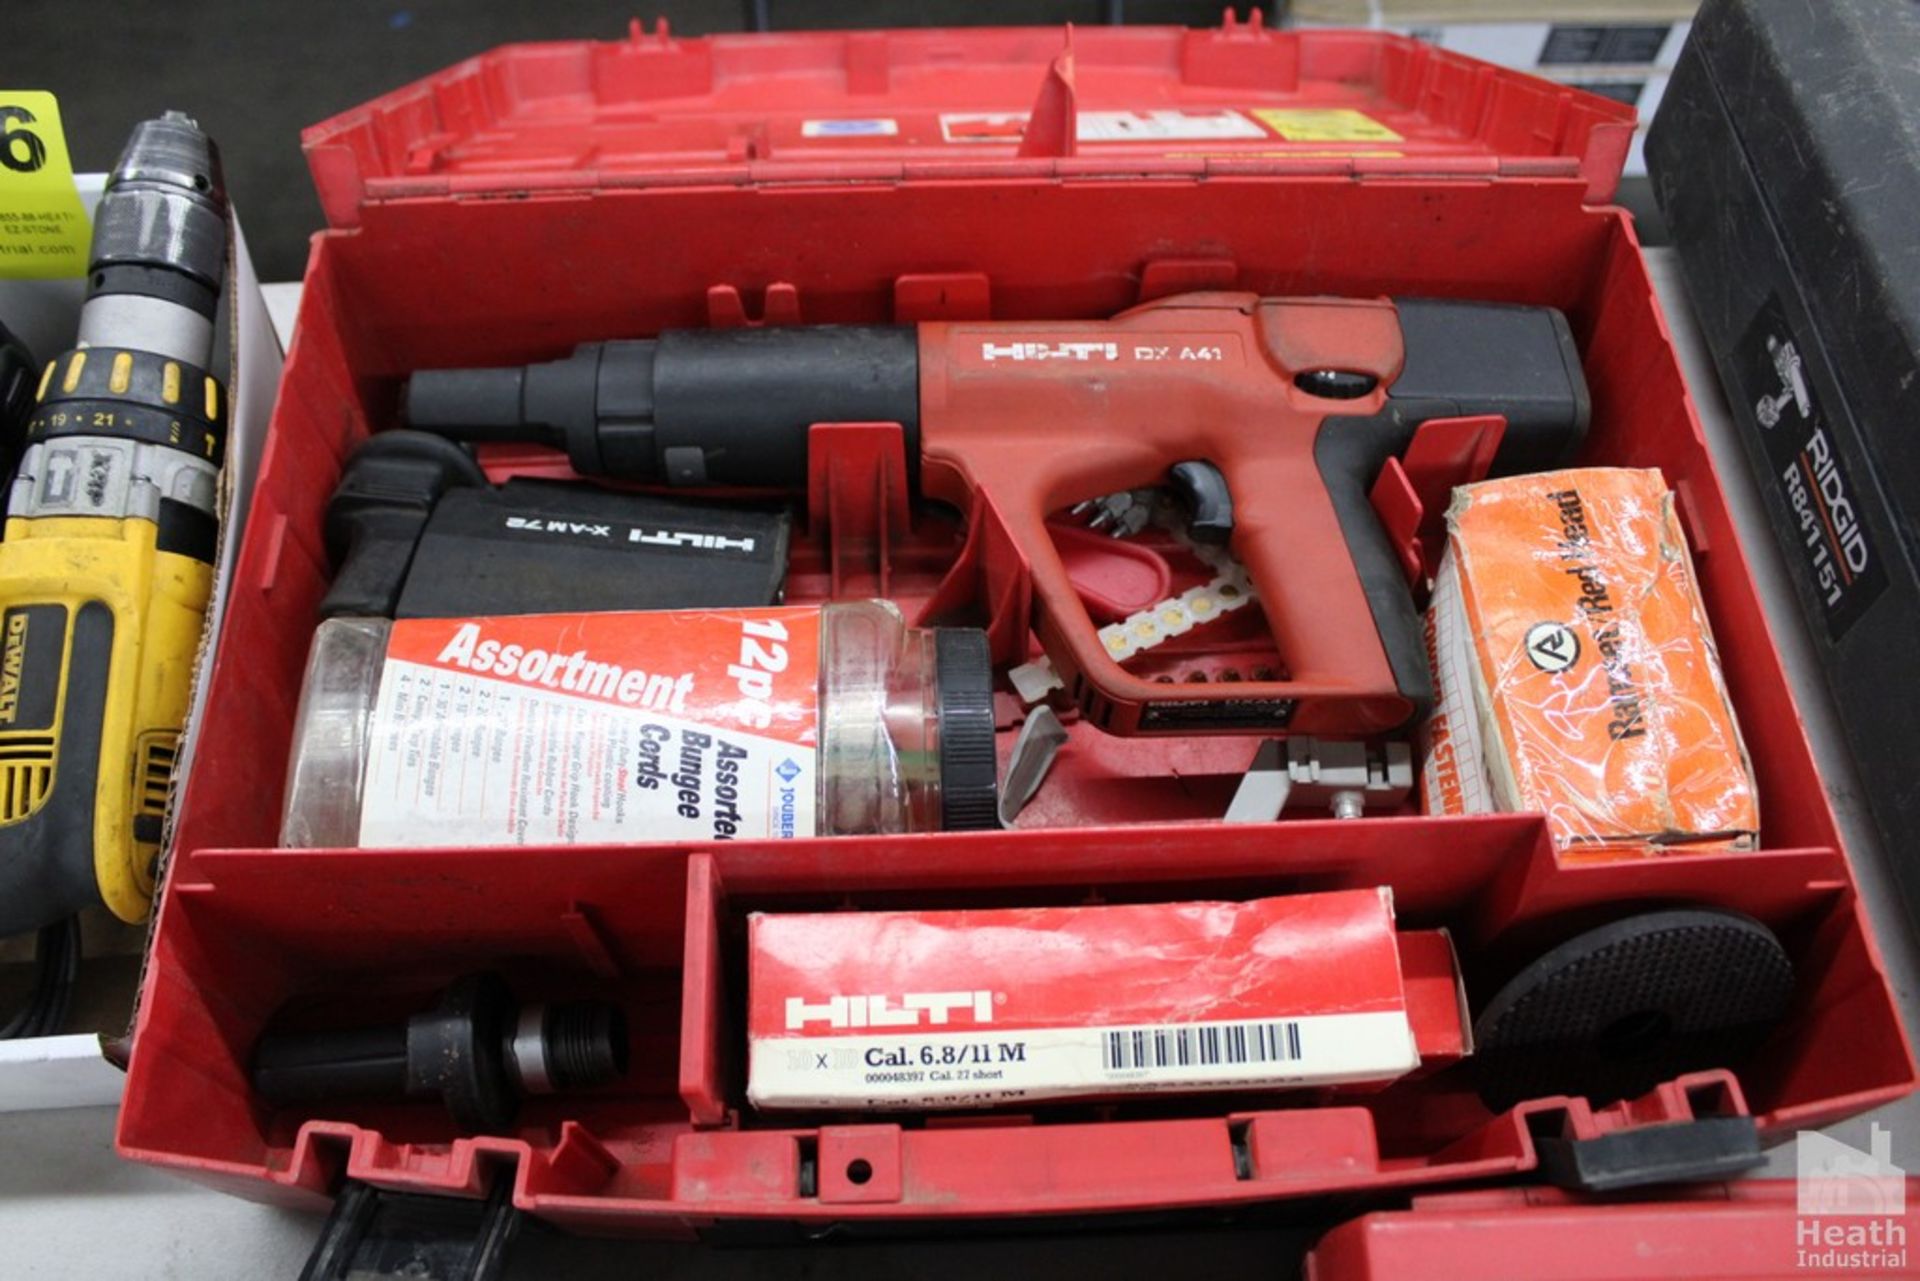 HILTI MODEL DX A41 POWDER ACTUATED NAIL DRIVER WITH CASE AND ACCESSORIES